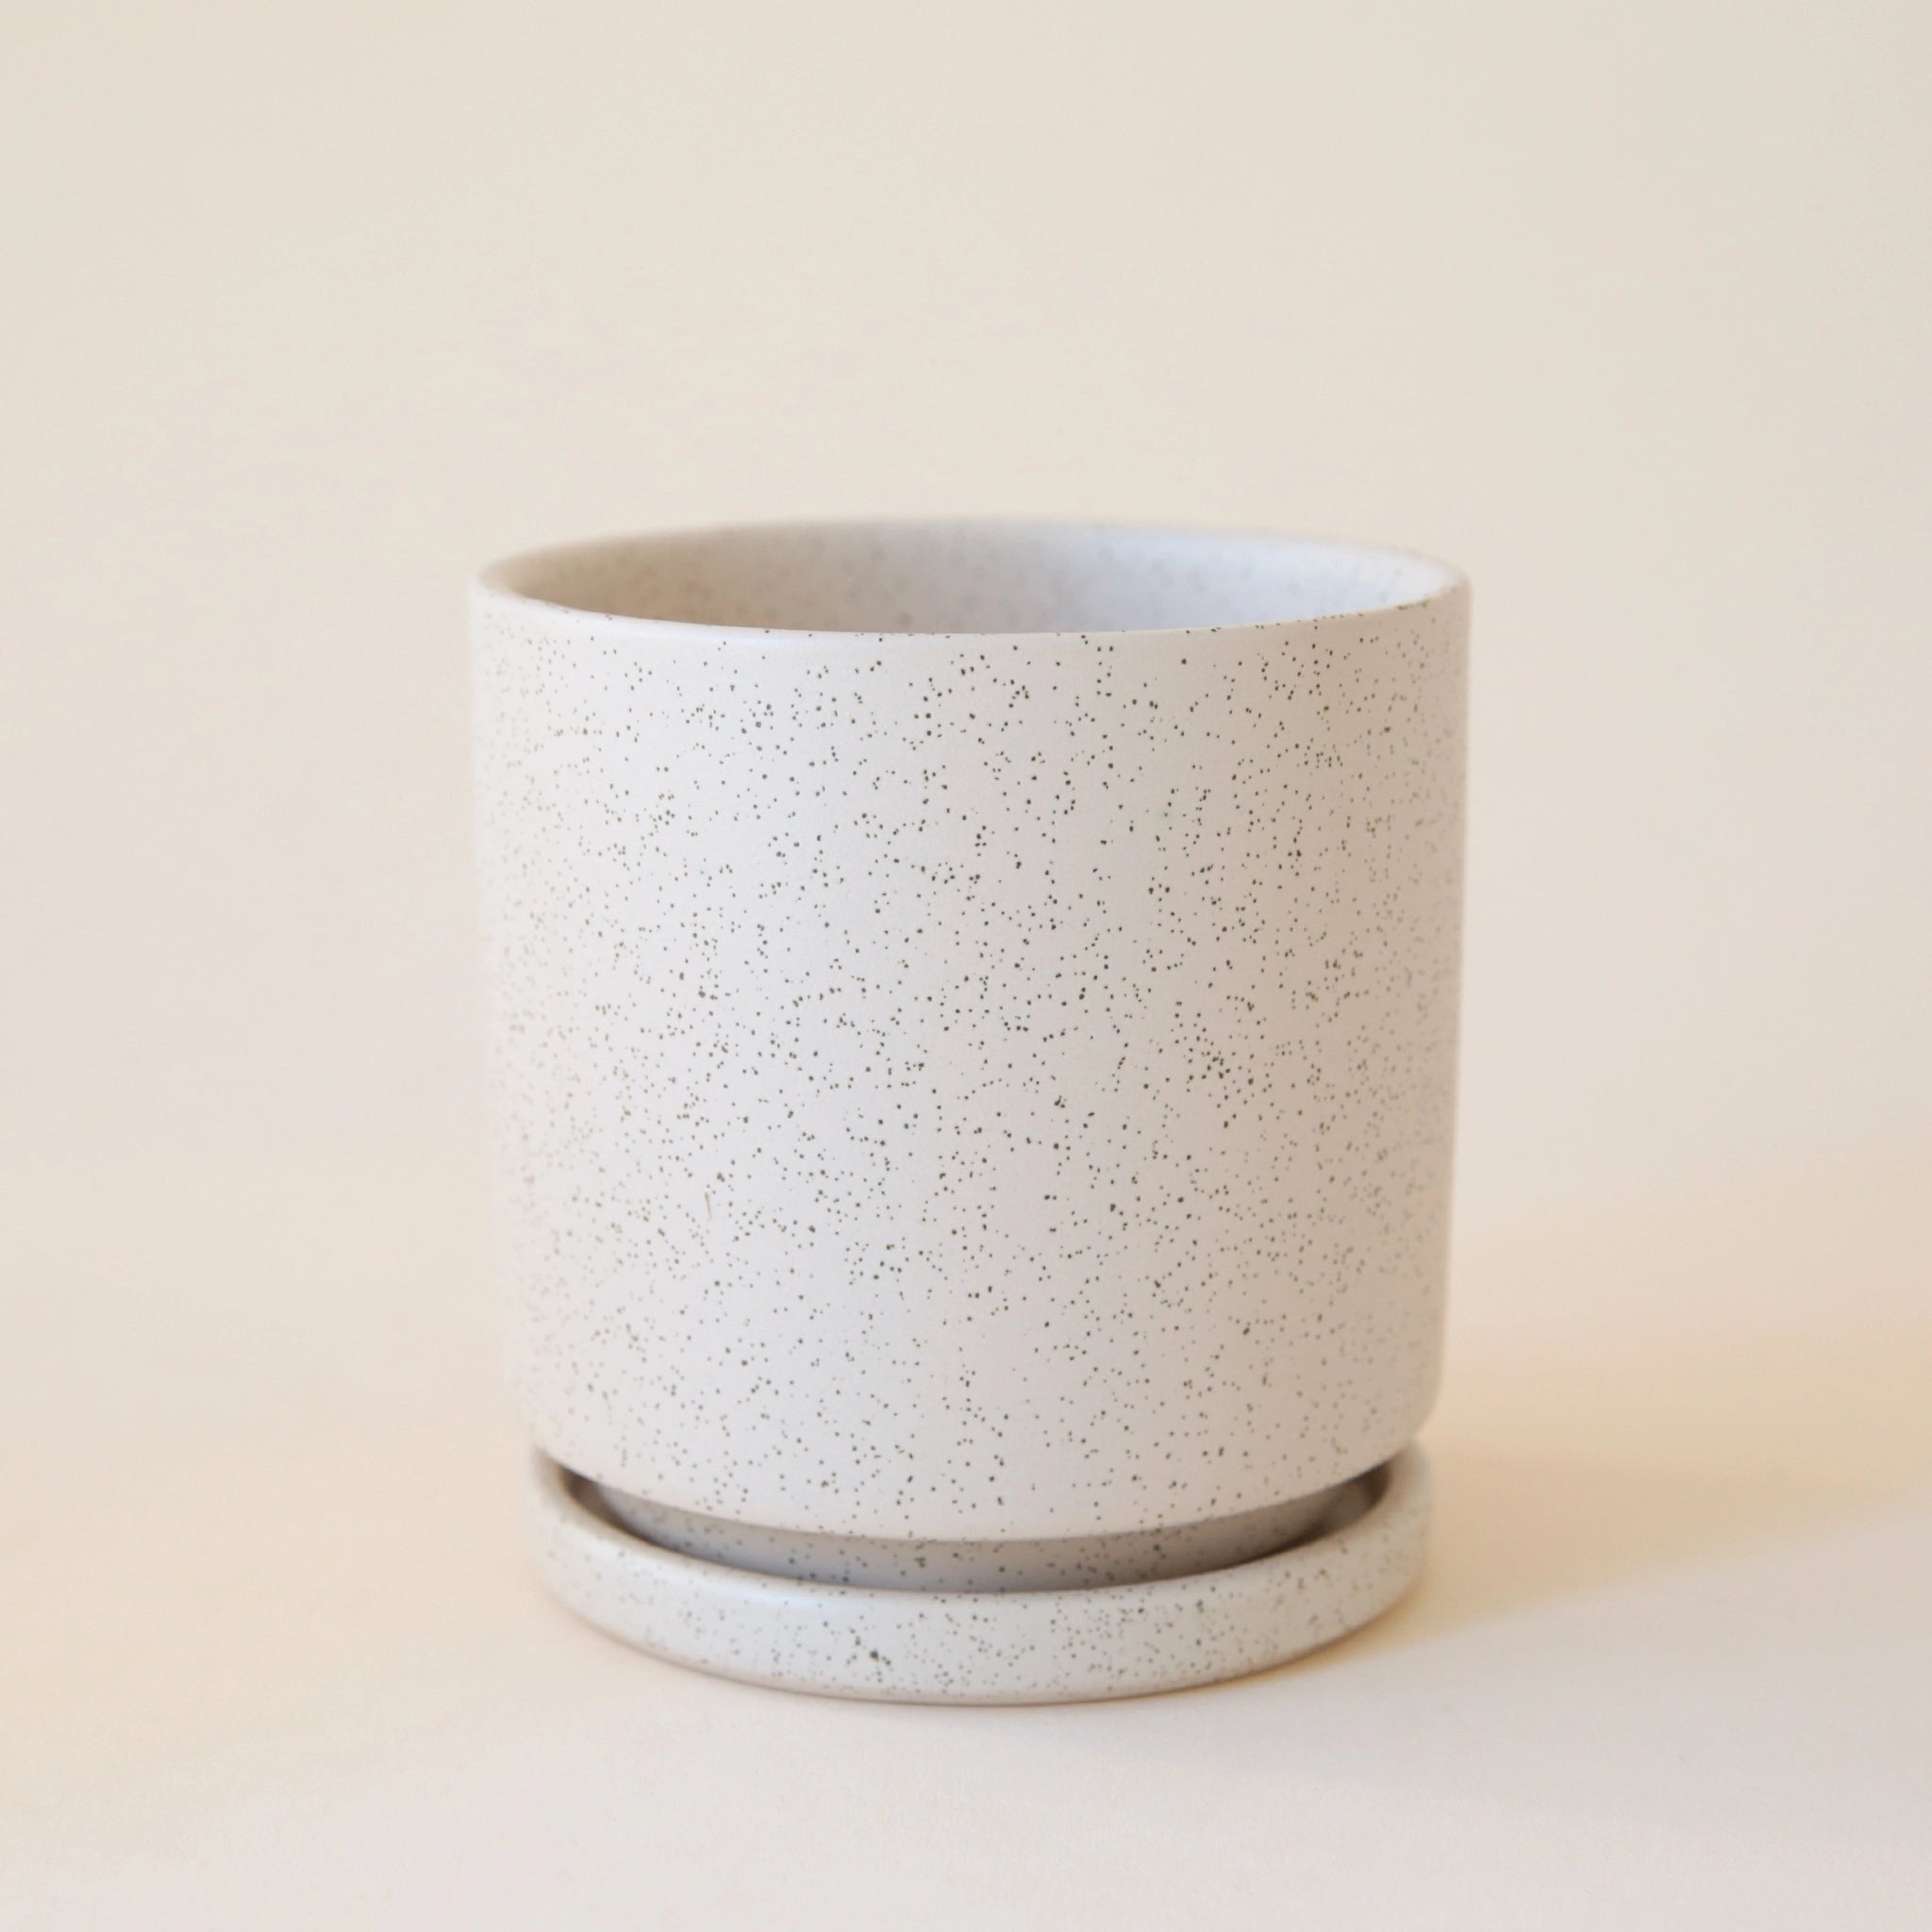 A cream with black speckled cylinder ceramic planter with a removable tray for watering. 